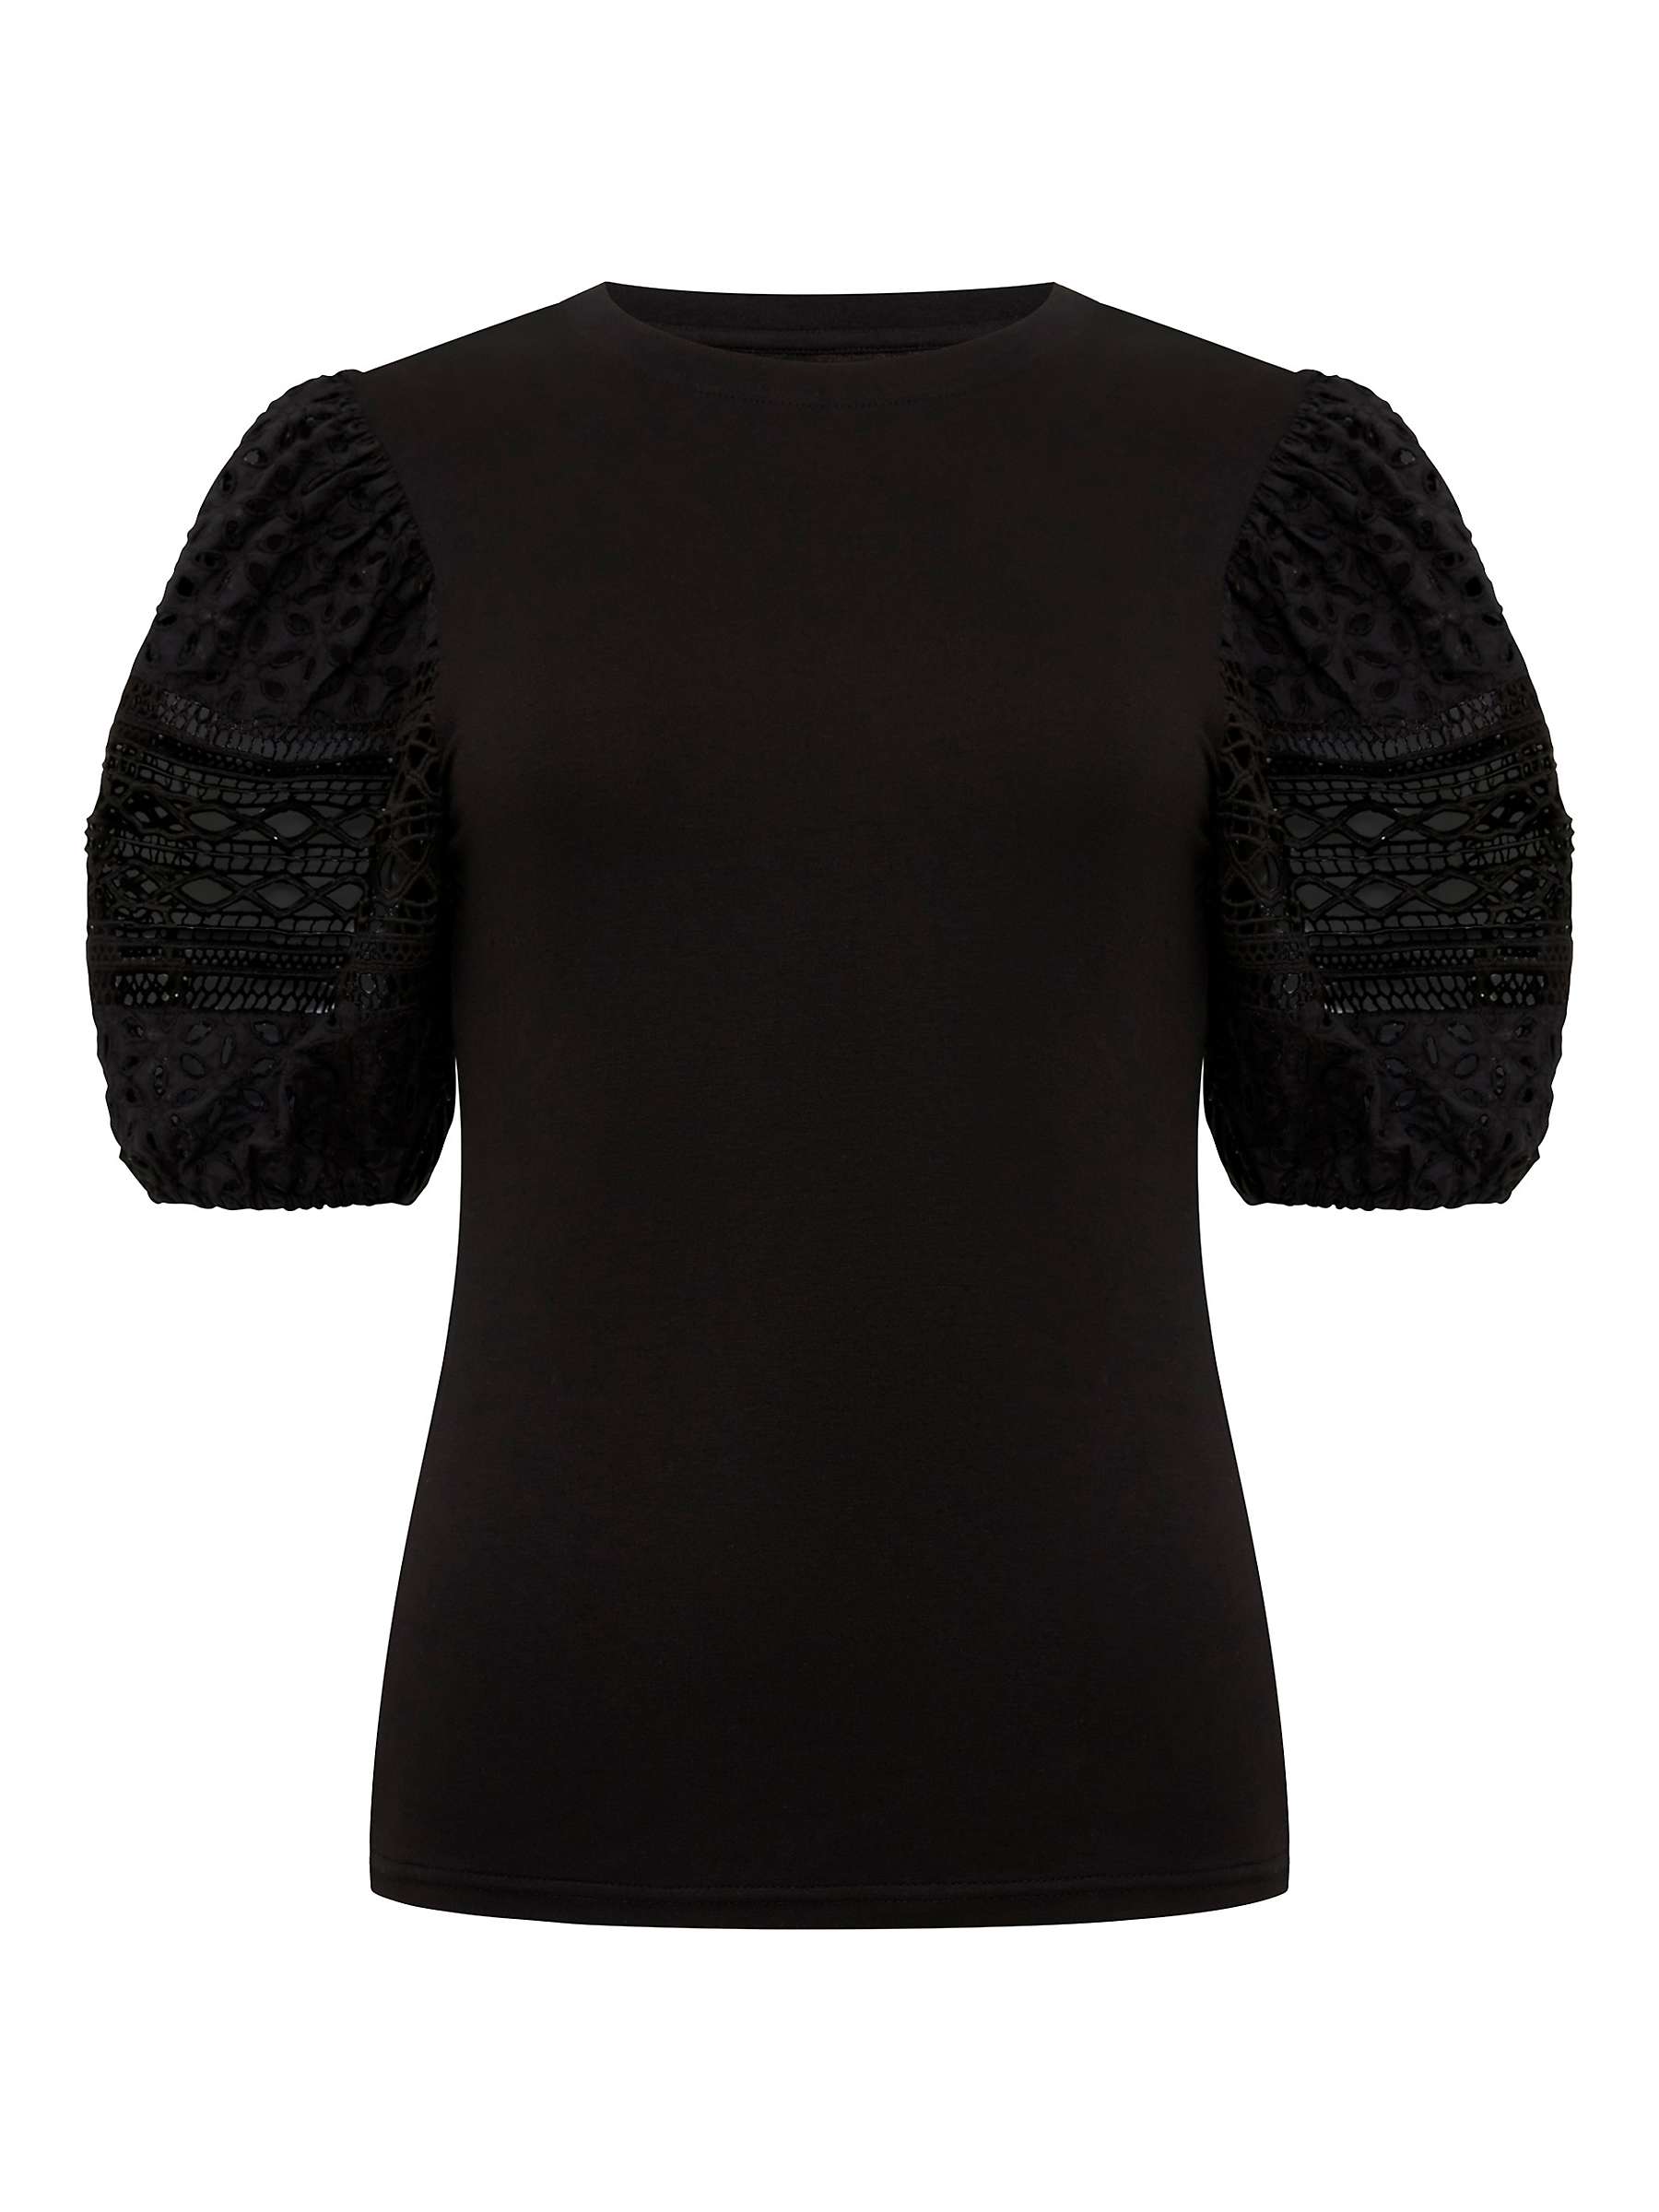 Buy French Connection Rosana Anges Embroidered Sleeve T-Shirt Online at johnlewis.com